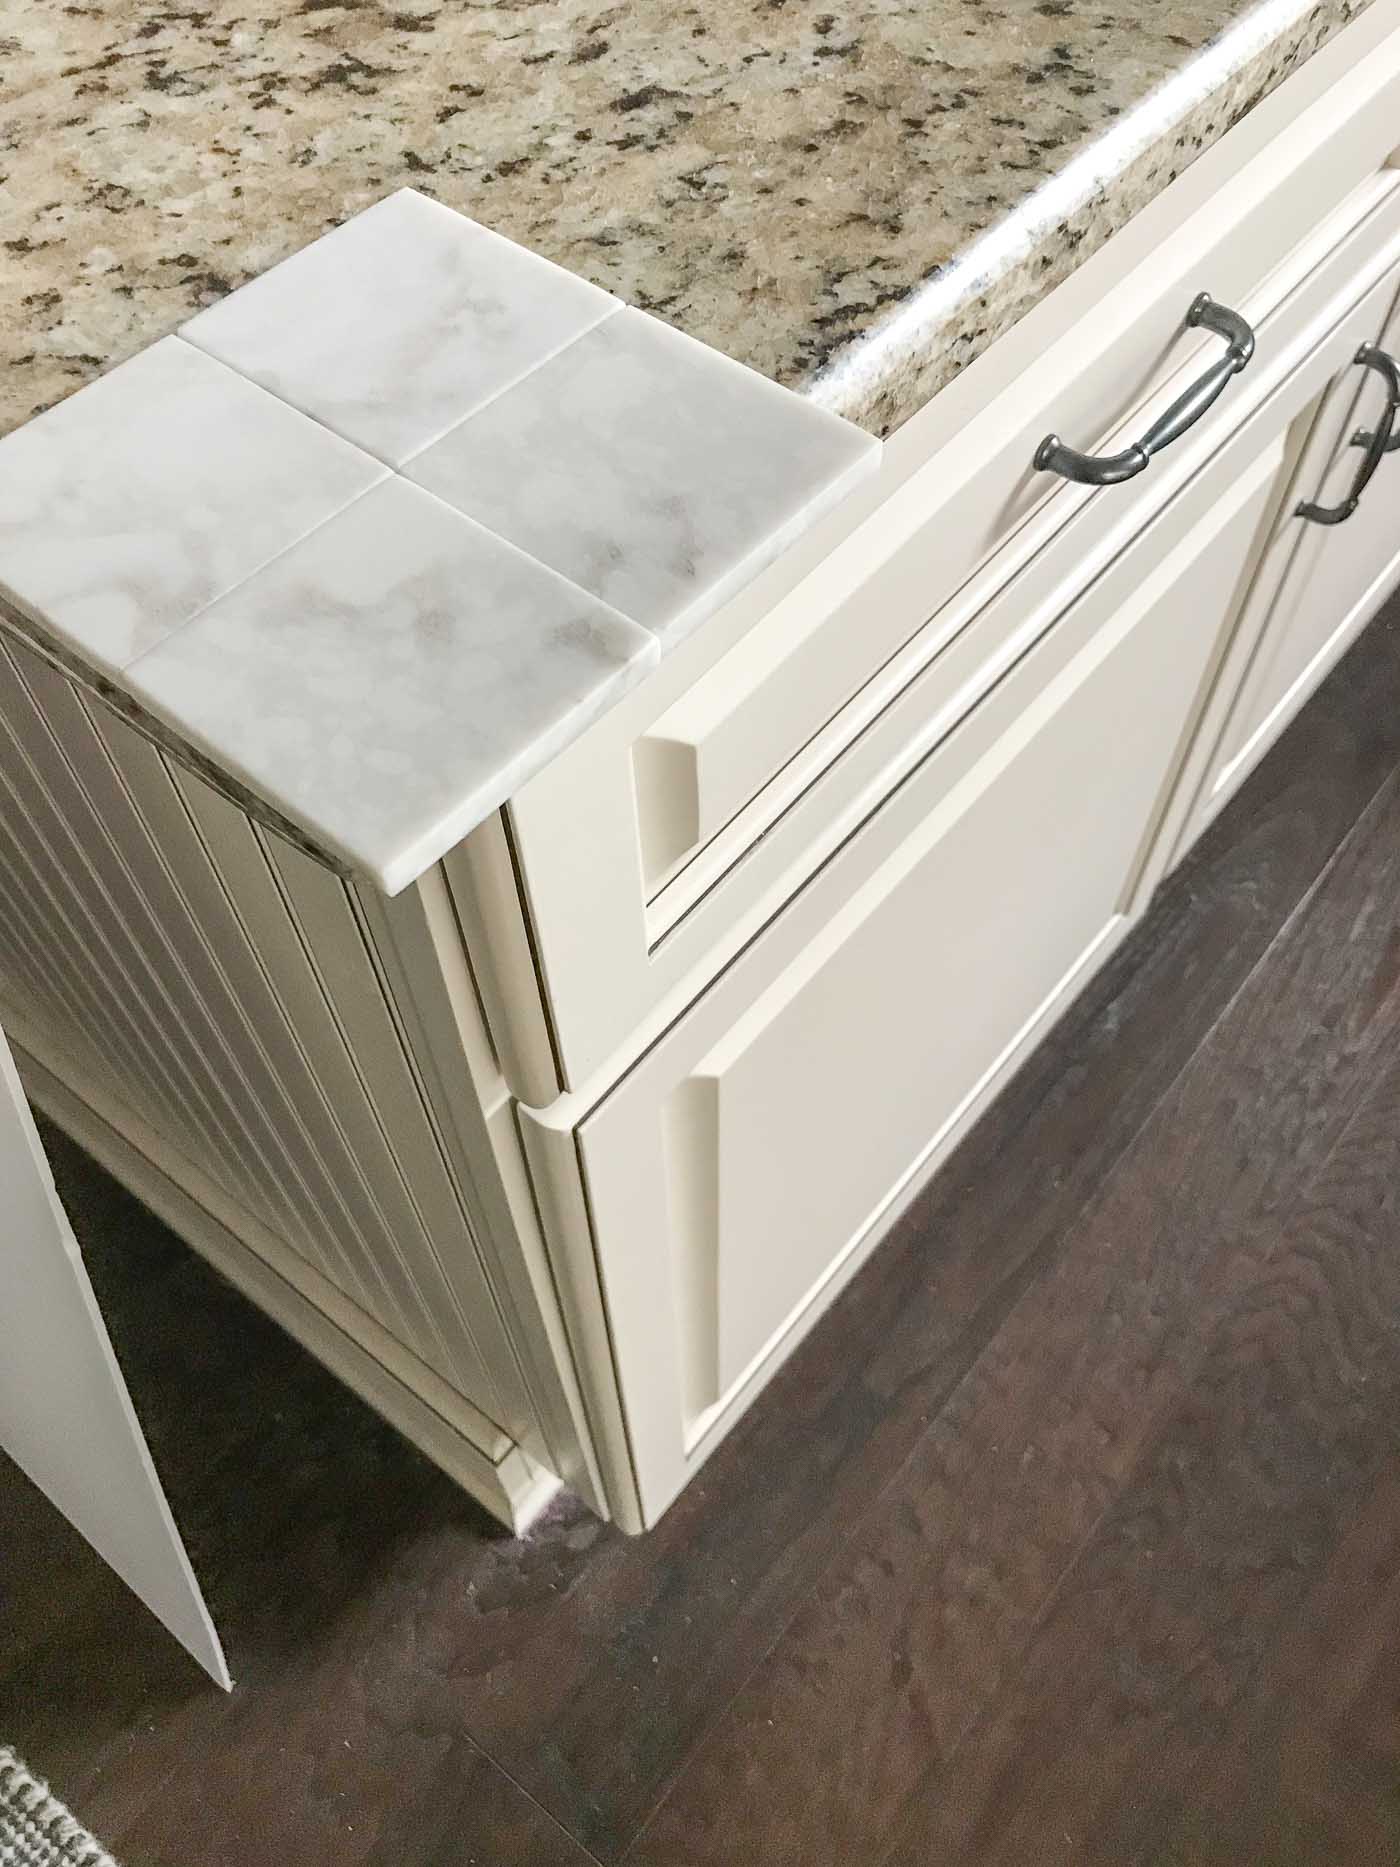 Cream Kitchen, What Color Countertop Goes With Off White Cabinets